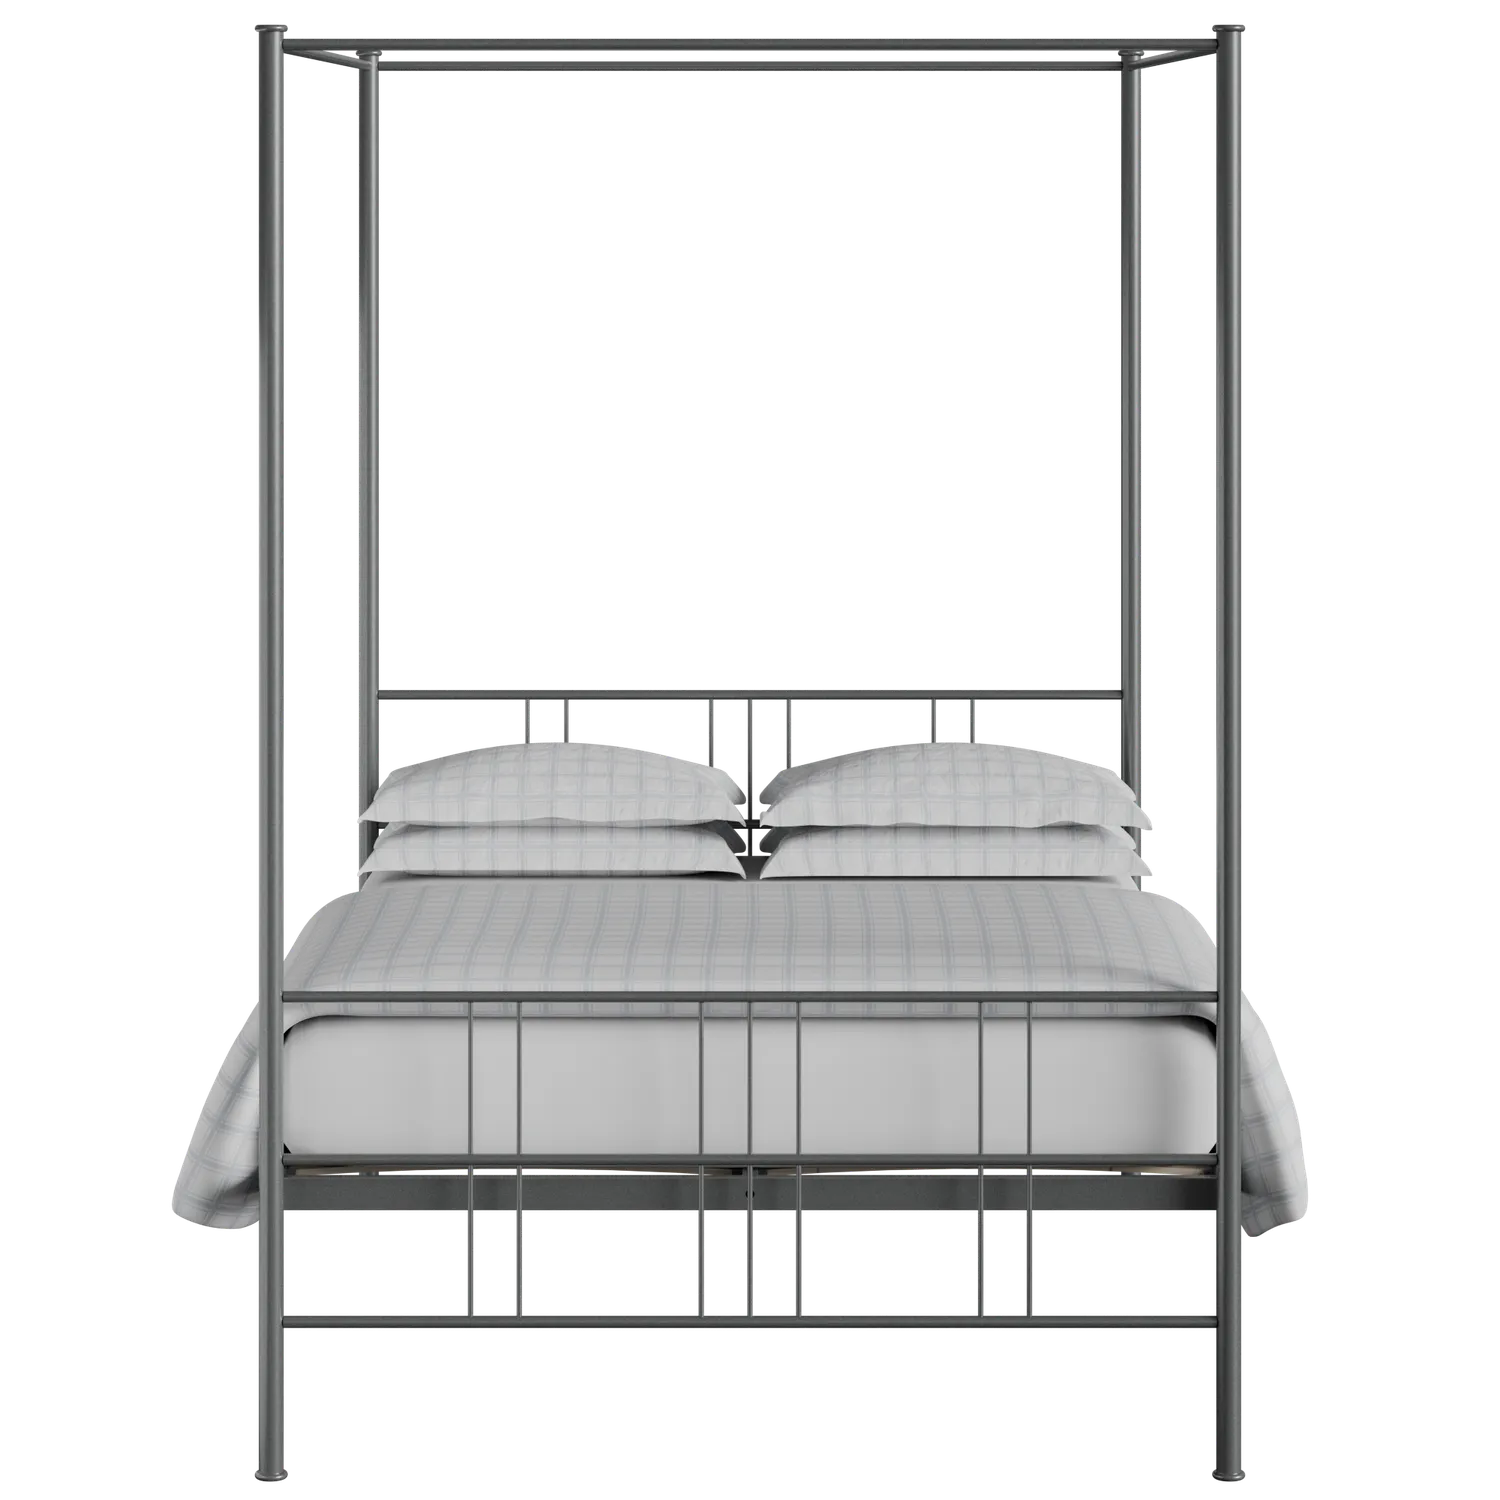 Toulon iron/metal bed in pewter